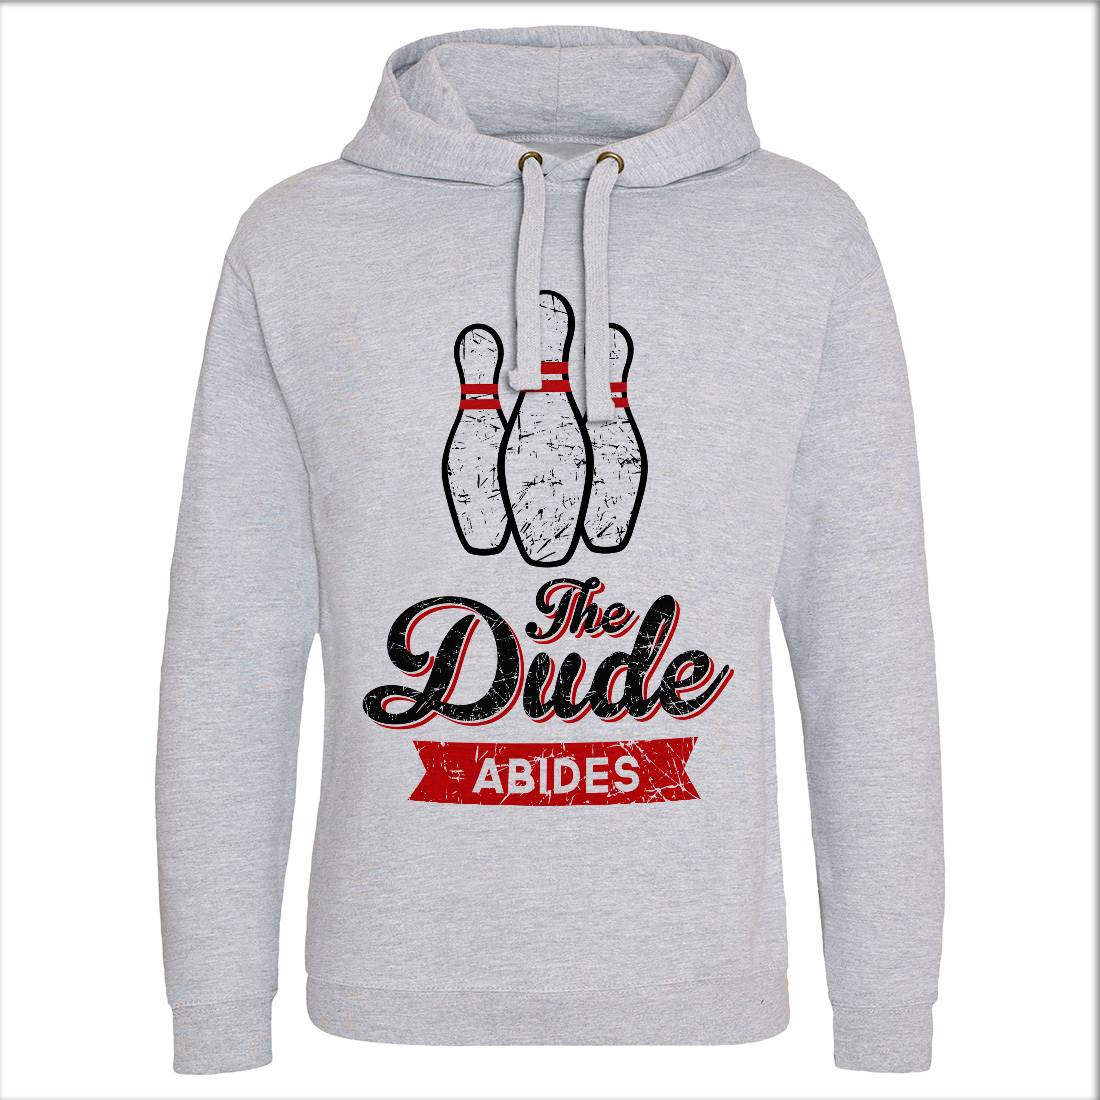 The Dude Mens Hoodie Without Pocket Sport D361